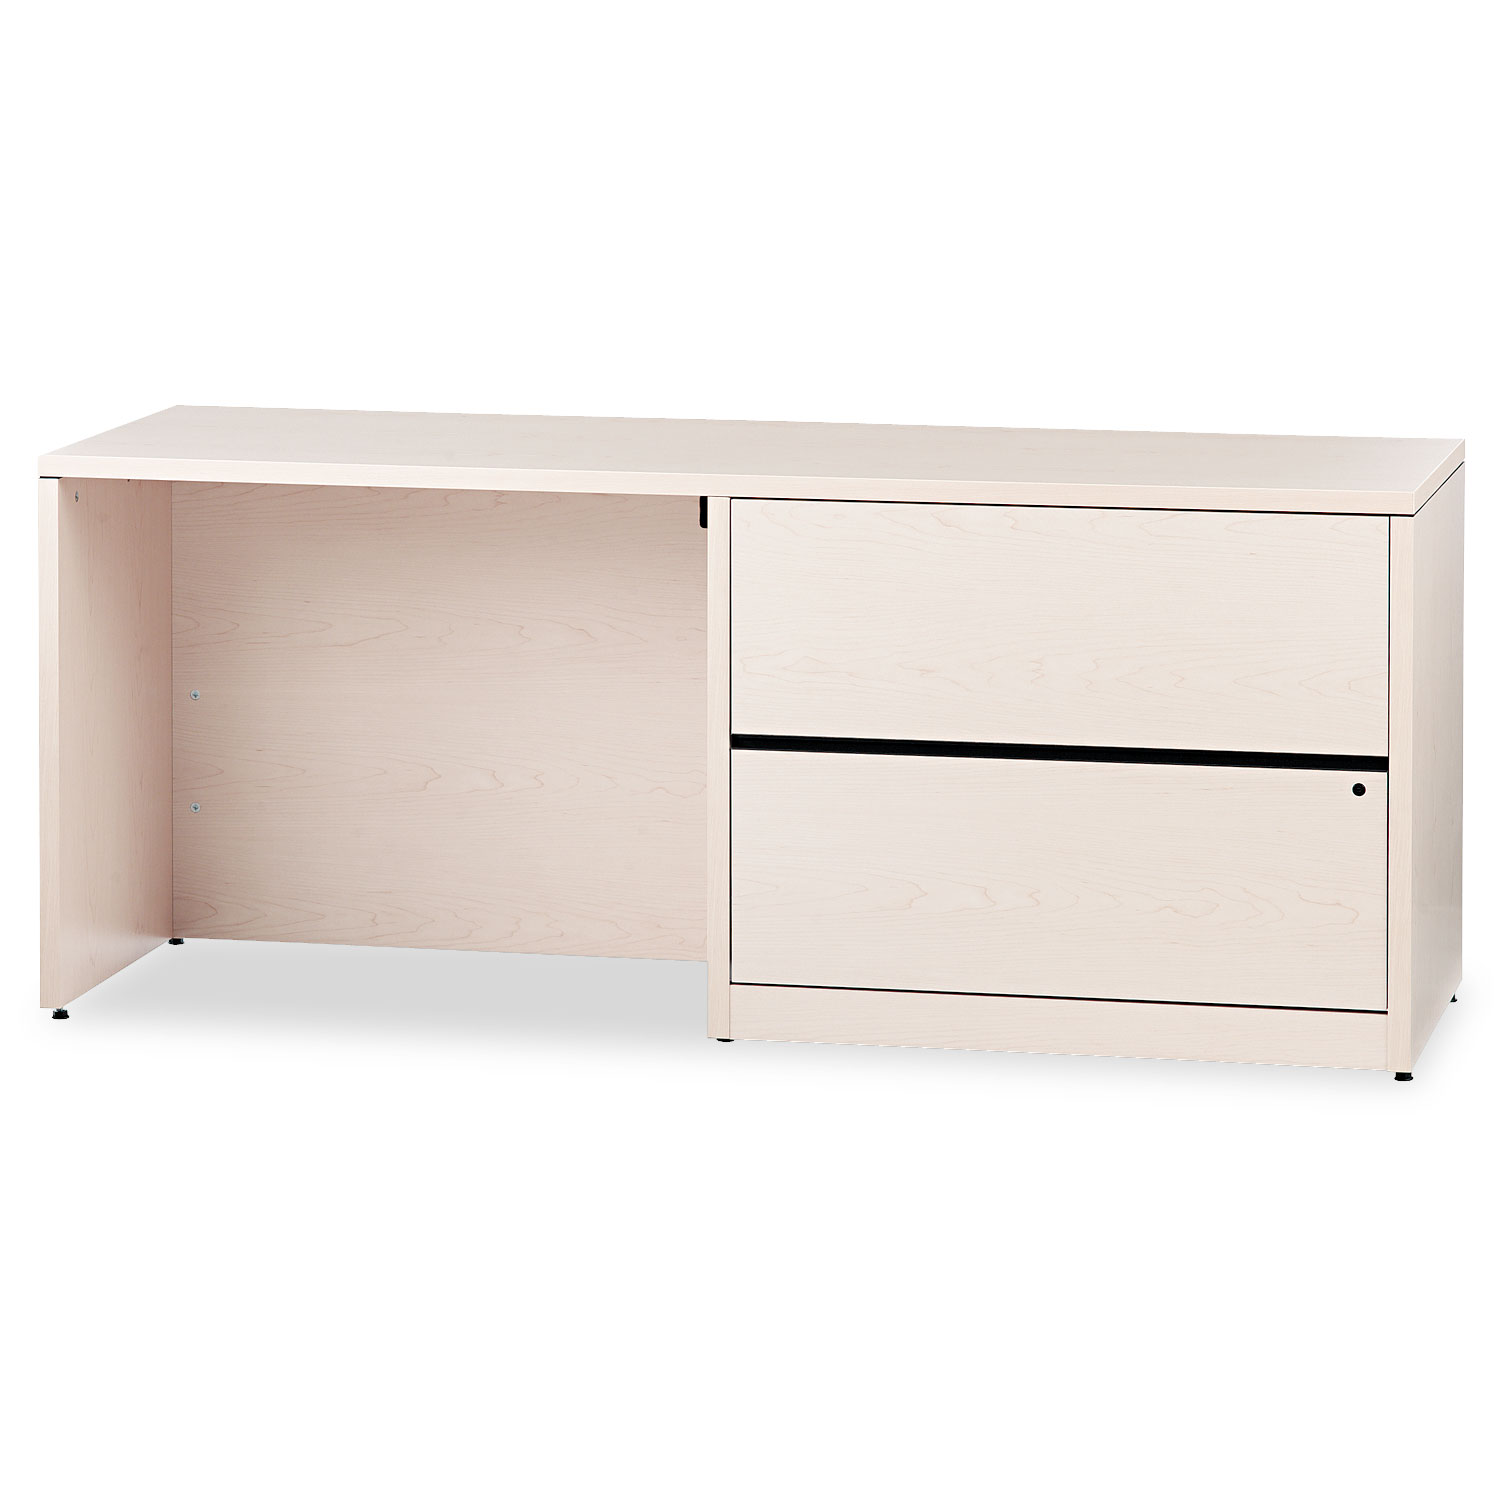  HON H10547R.DD 10500 Series Credenza w/Right Lateral File, 72w x 24d x 29.5h, Natural Maple (HON10547RDD) 